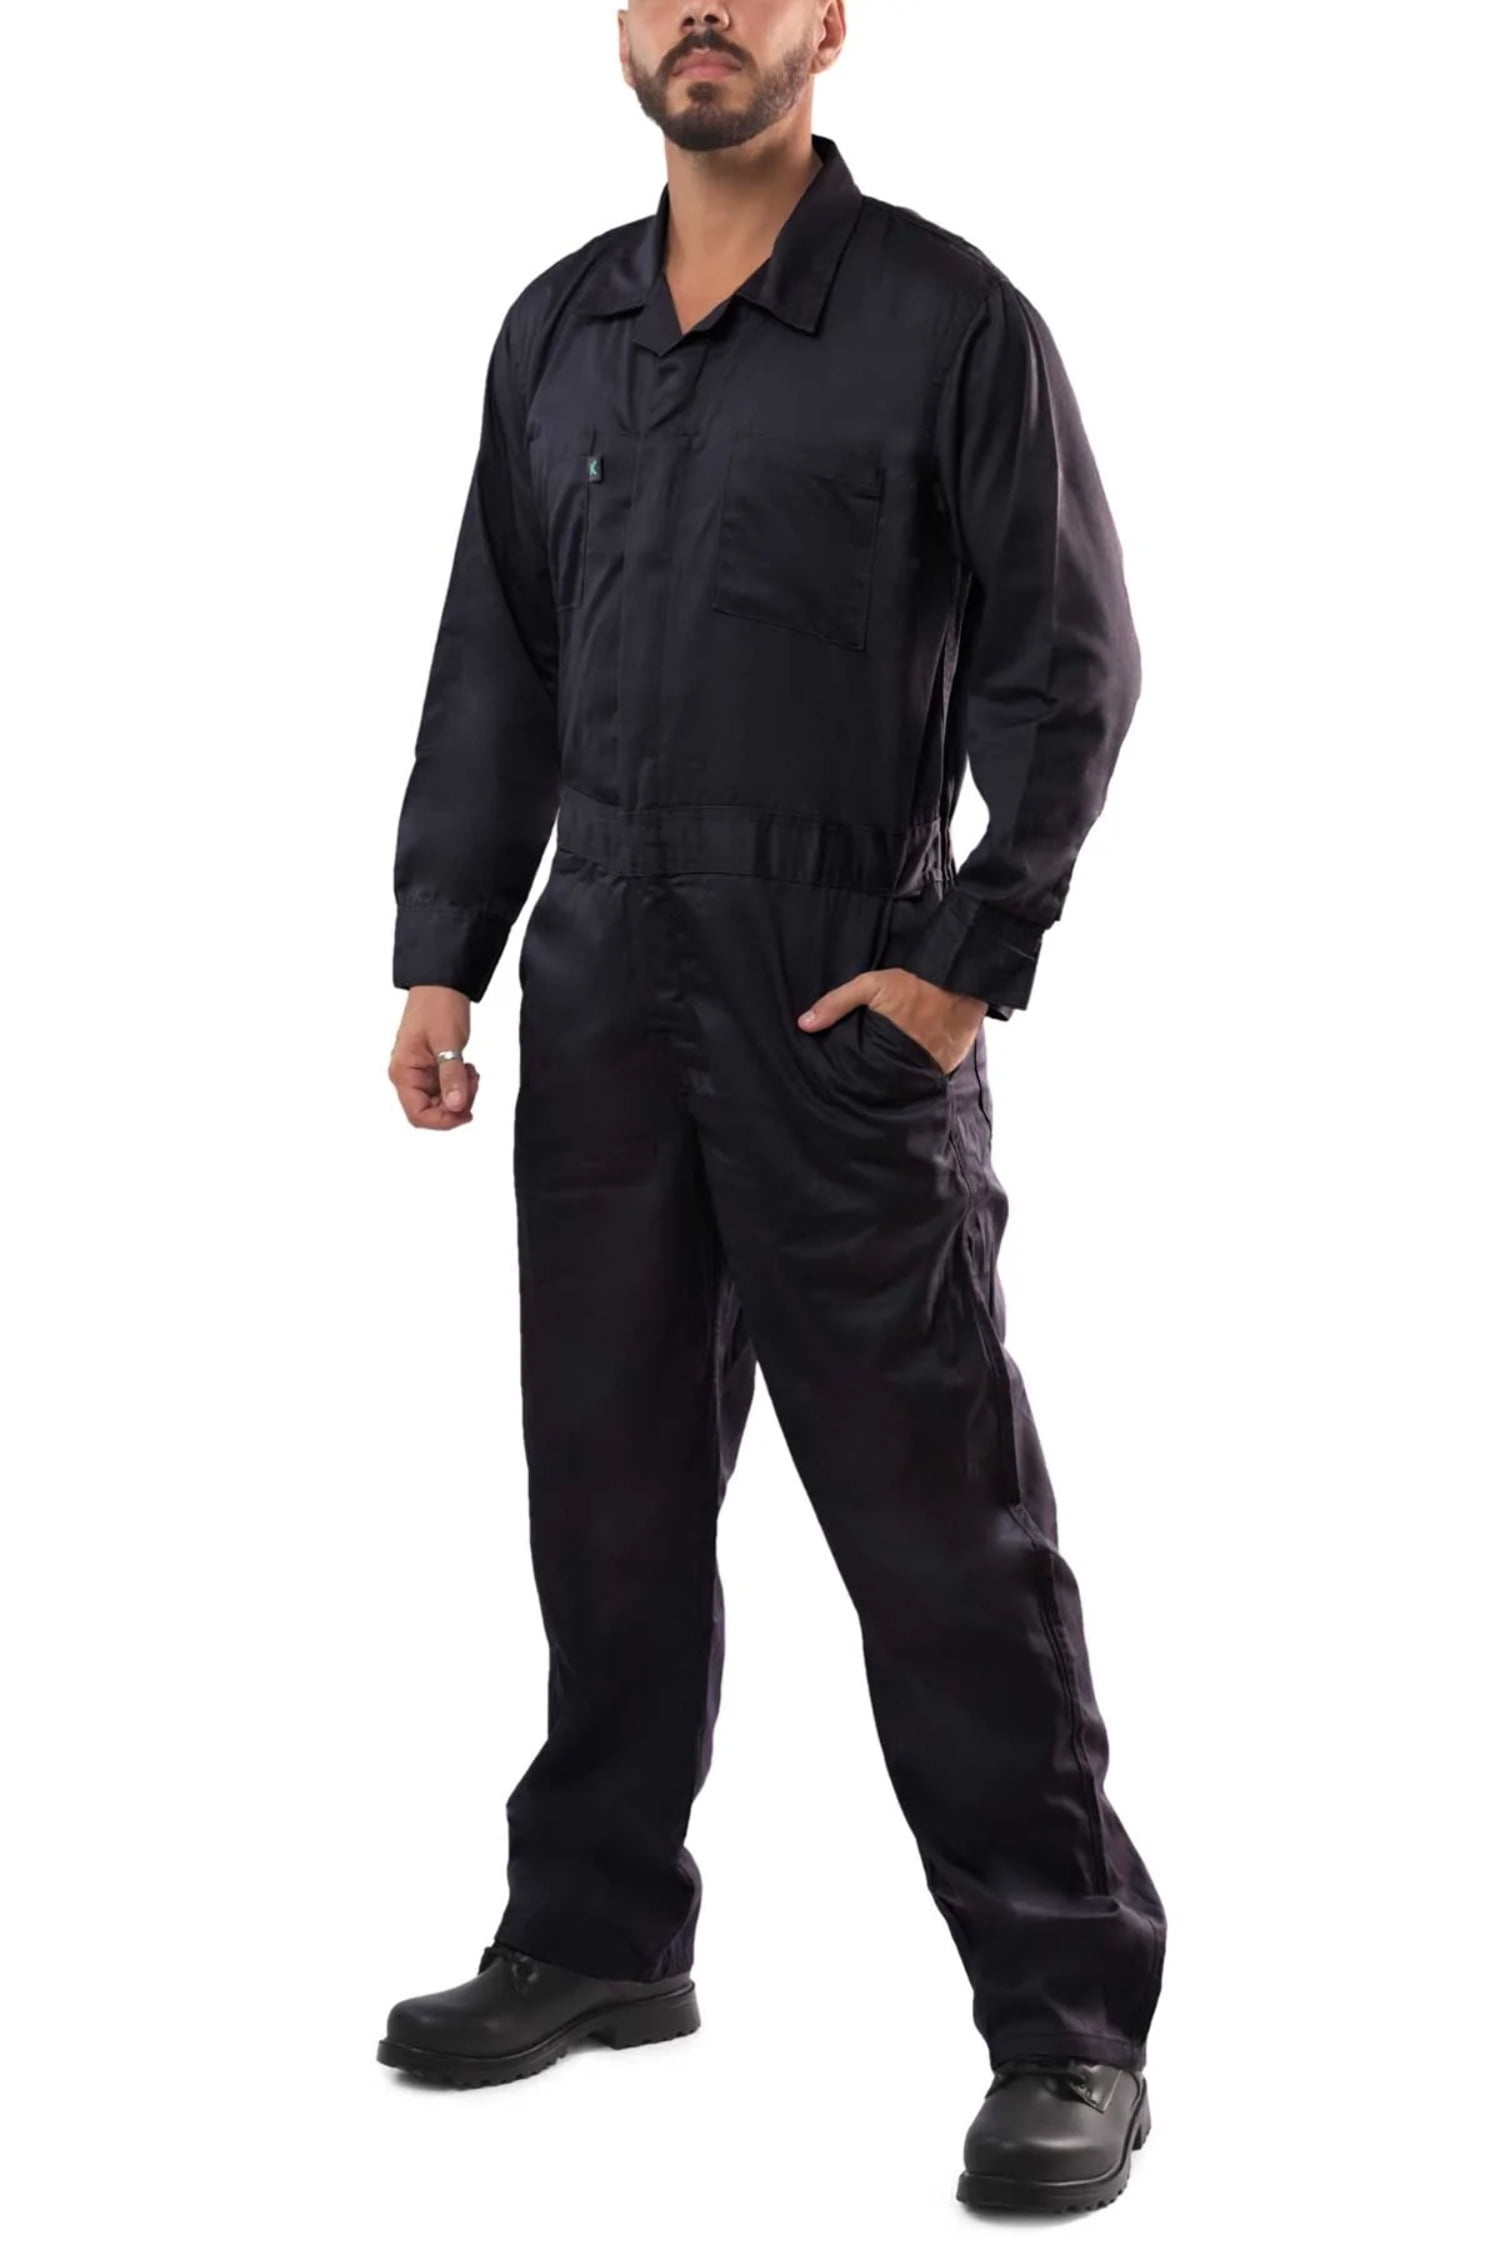 Kolossus Pro-Utility Cotton Blend Long Sleeve Coverall with Zippered Frontal Pockets 